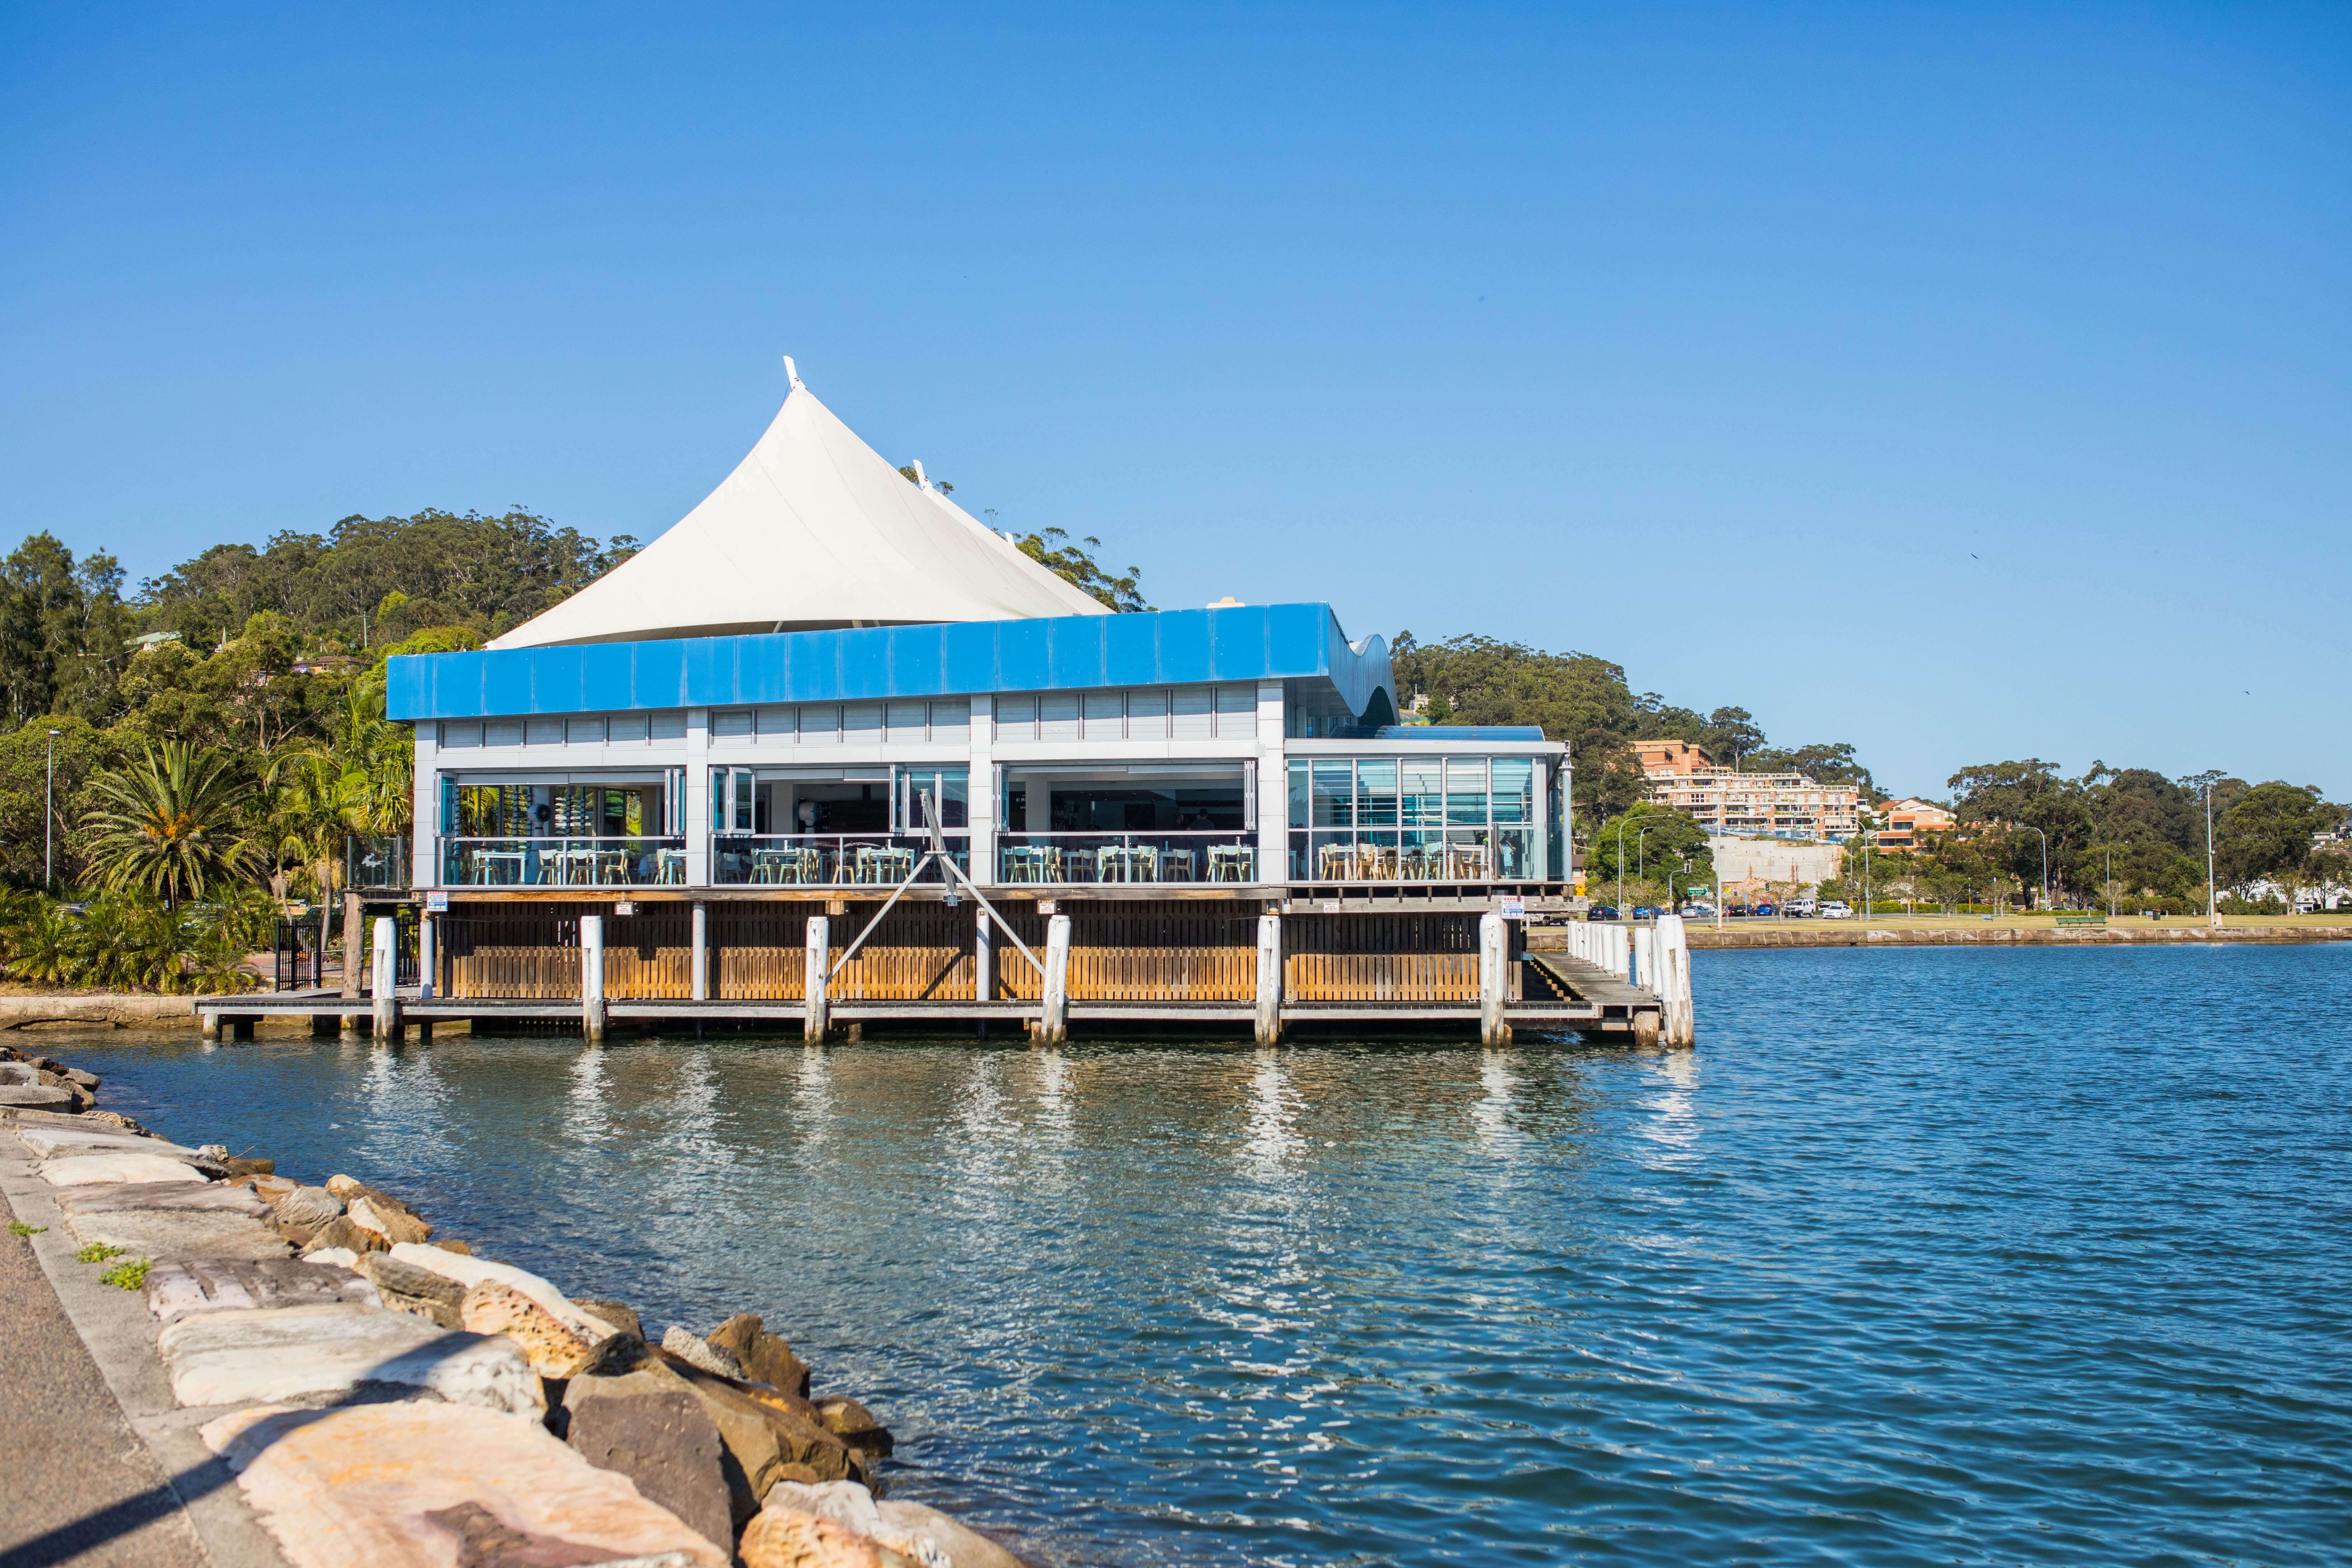 Drifters Wharf located on Gosford's Brisbane Water's edge and along the shared pathway